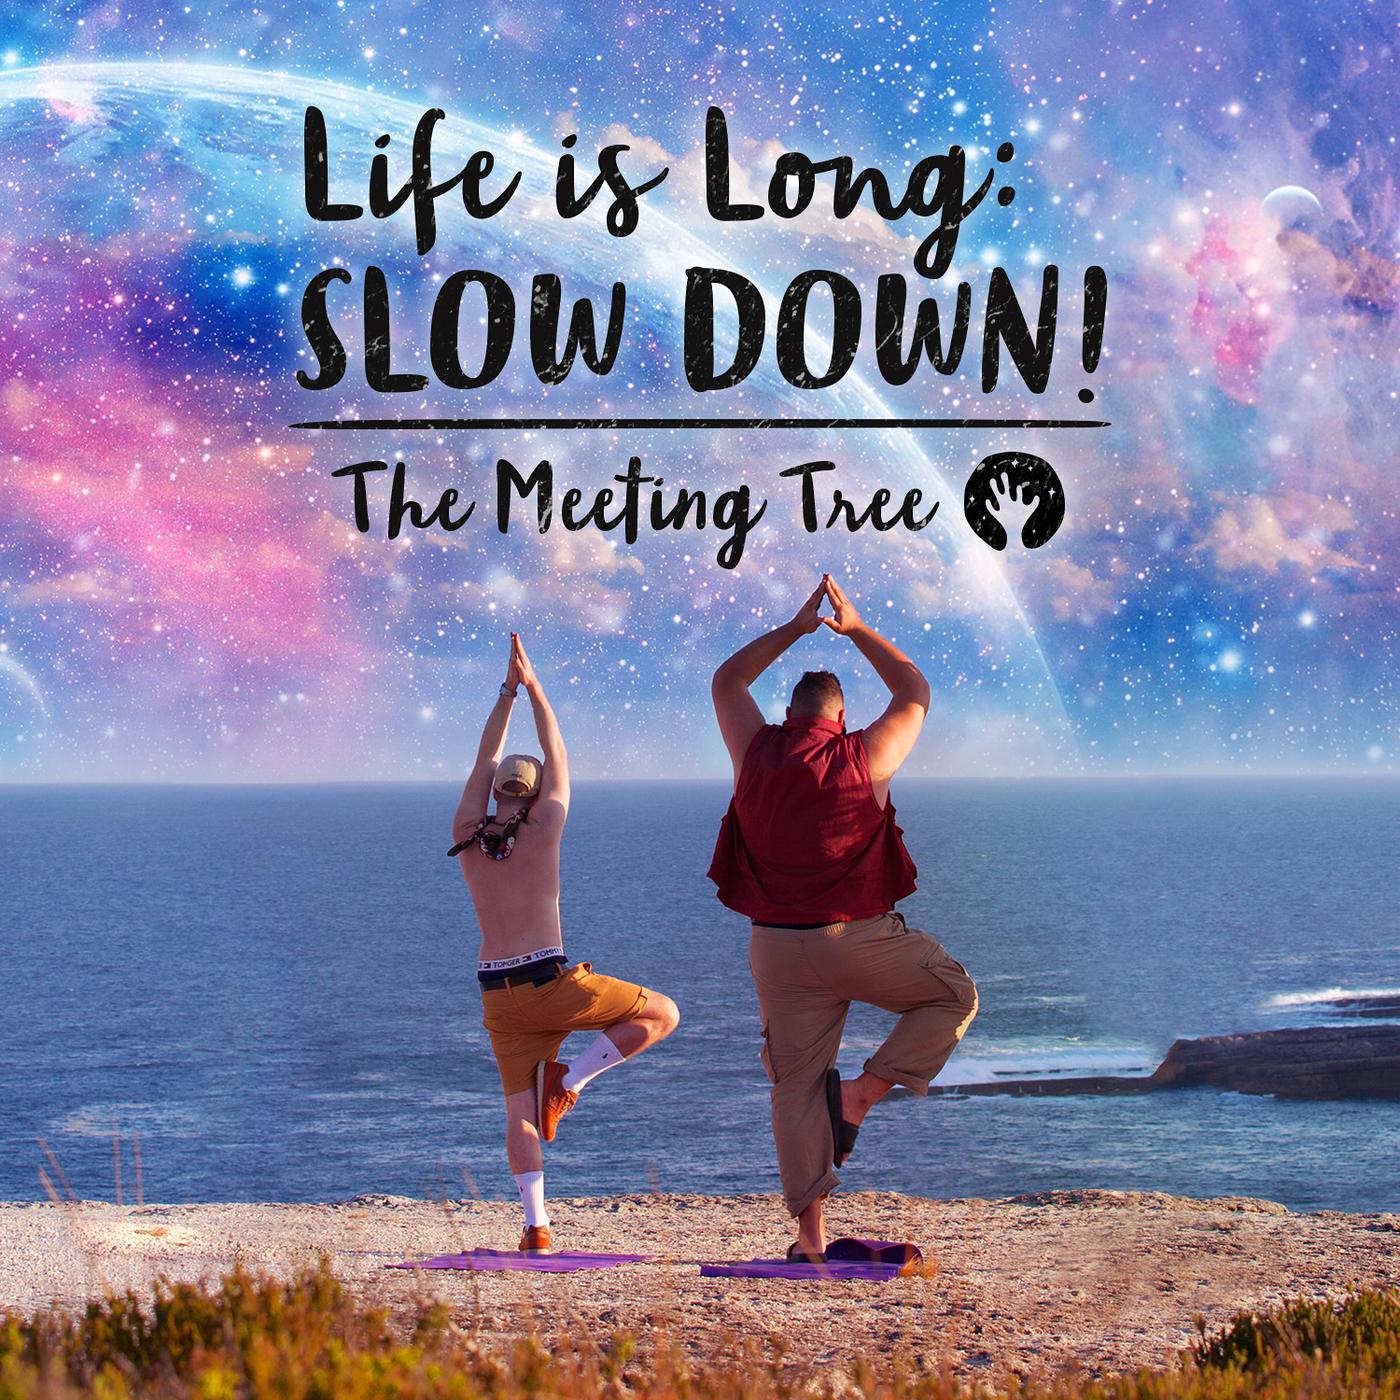 The Meeting Tree - Life is Long: Slow Down!